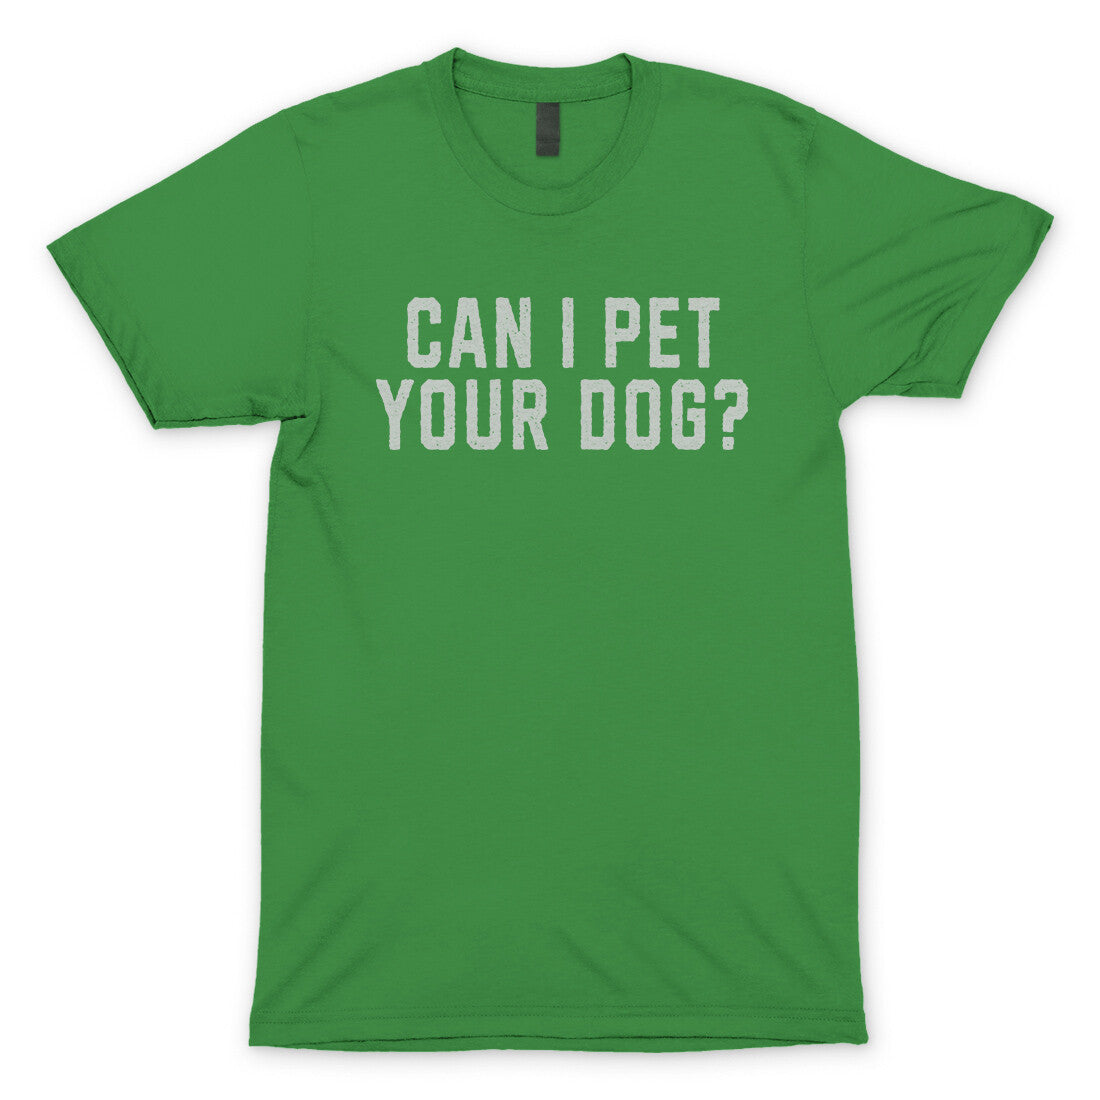 Can I Pet your Dog in Irish Green Color